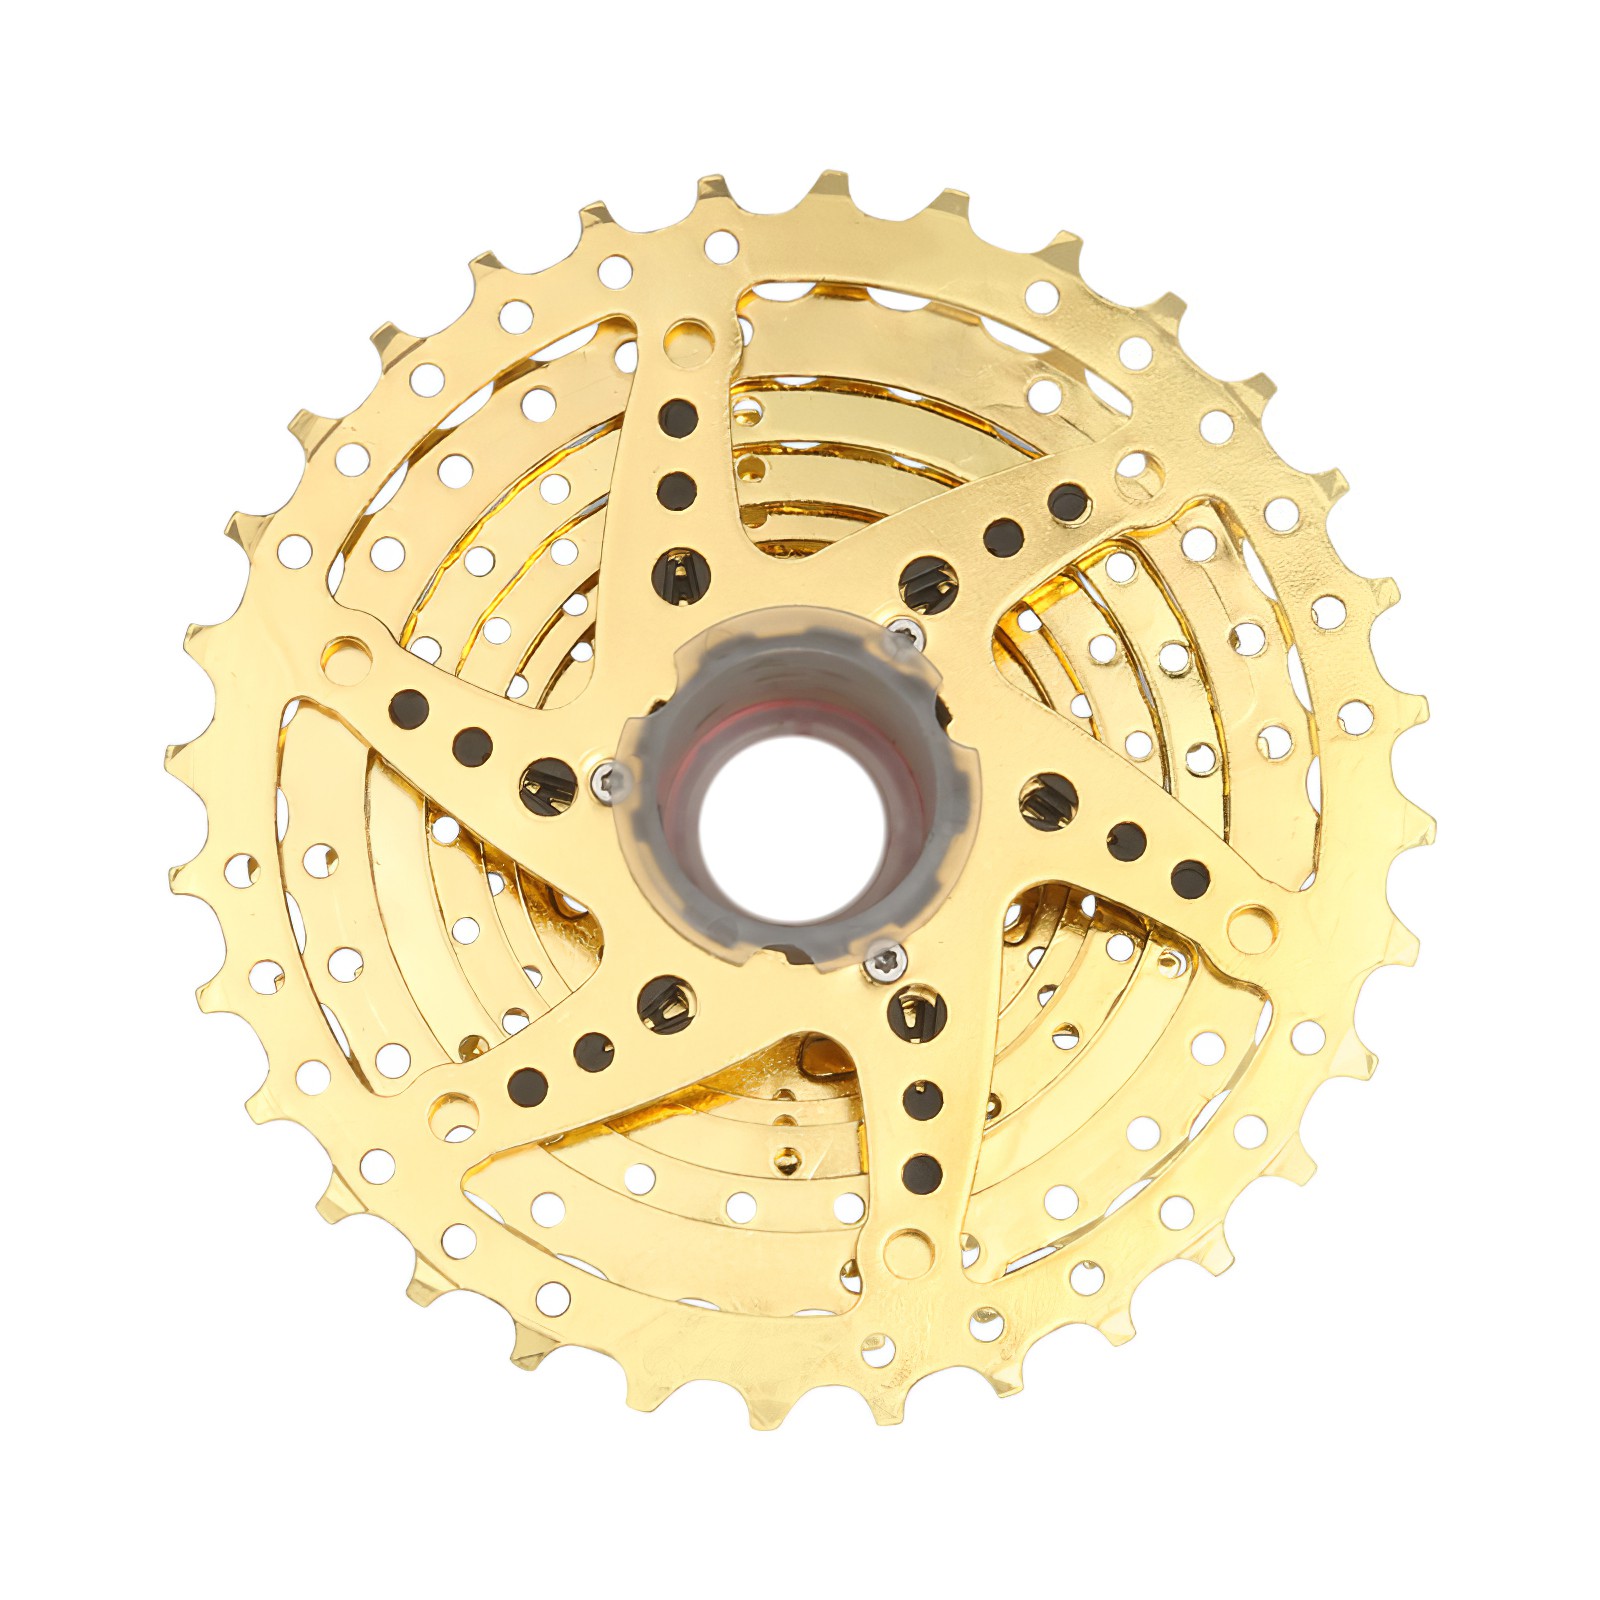 YGCX5-Bicycle Cassette 9 Speeds 11-32T Chrome-Molybdenum Steel Mountain Bike Flywheel Durable Hollow Design Golden Bicycle Parts Climbing Flywheel Cycling Accessories